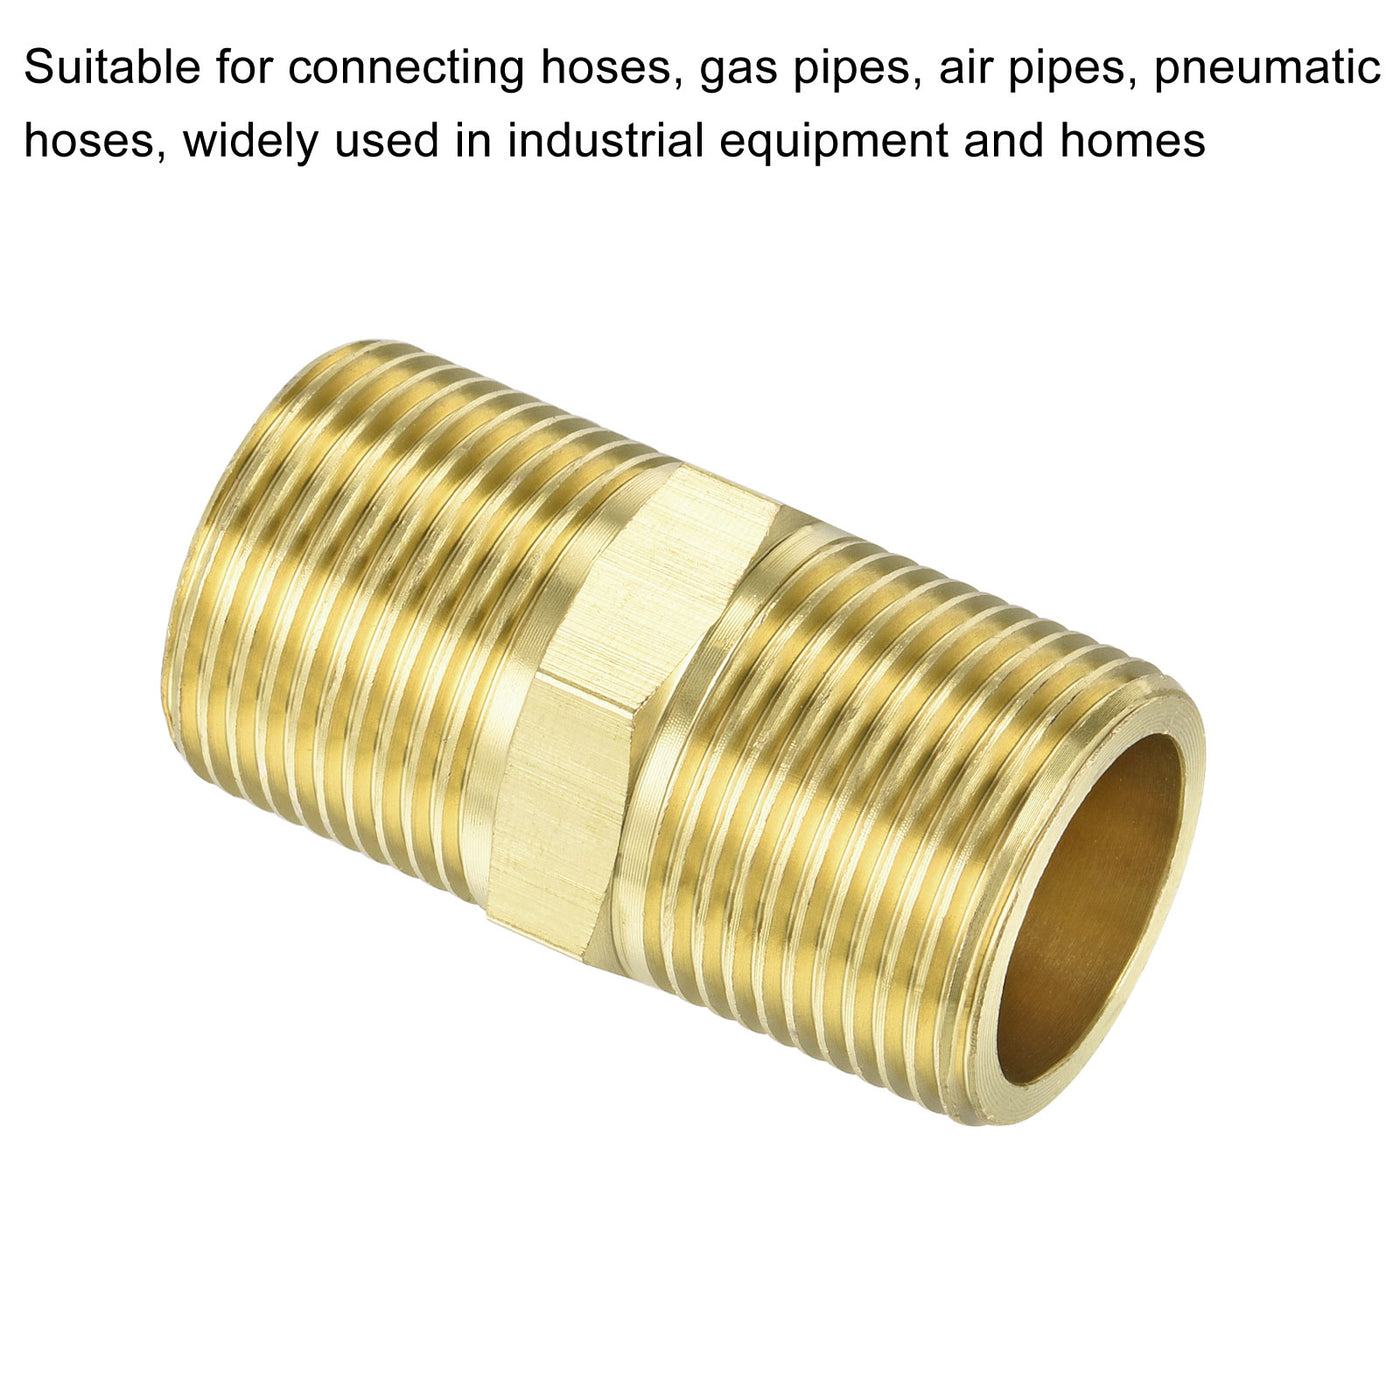 Harfington Brass Pipe Fitting G3/4 Male Thread 50mm Hex Connector Pipe Adapter 2 Pack